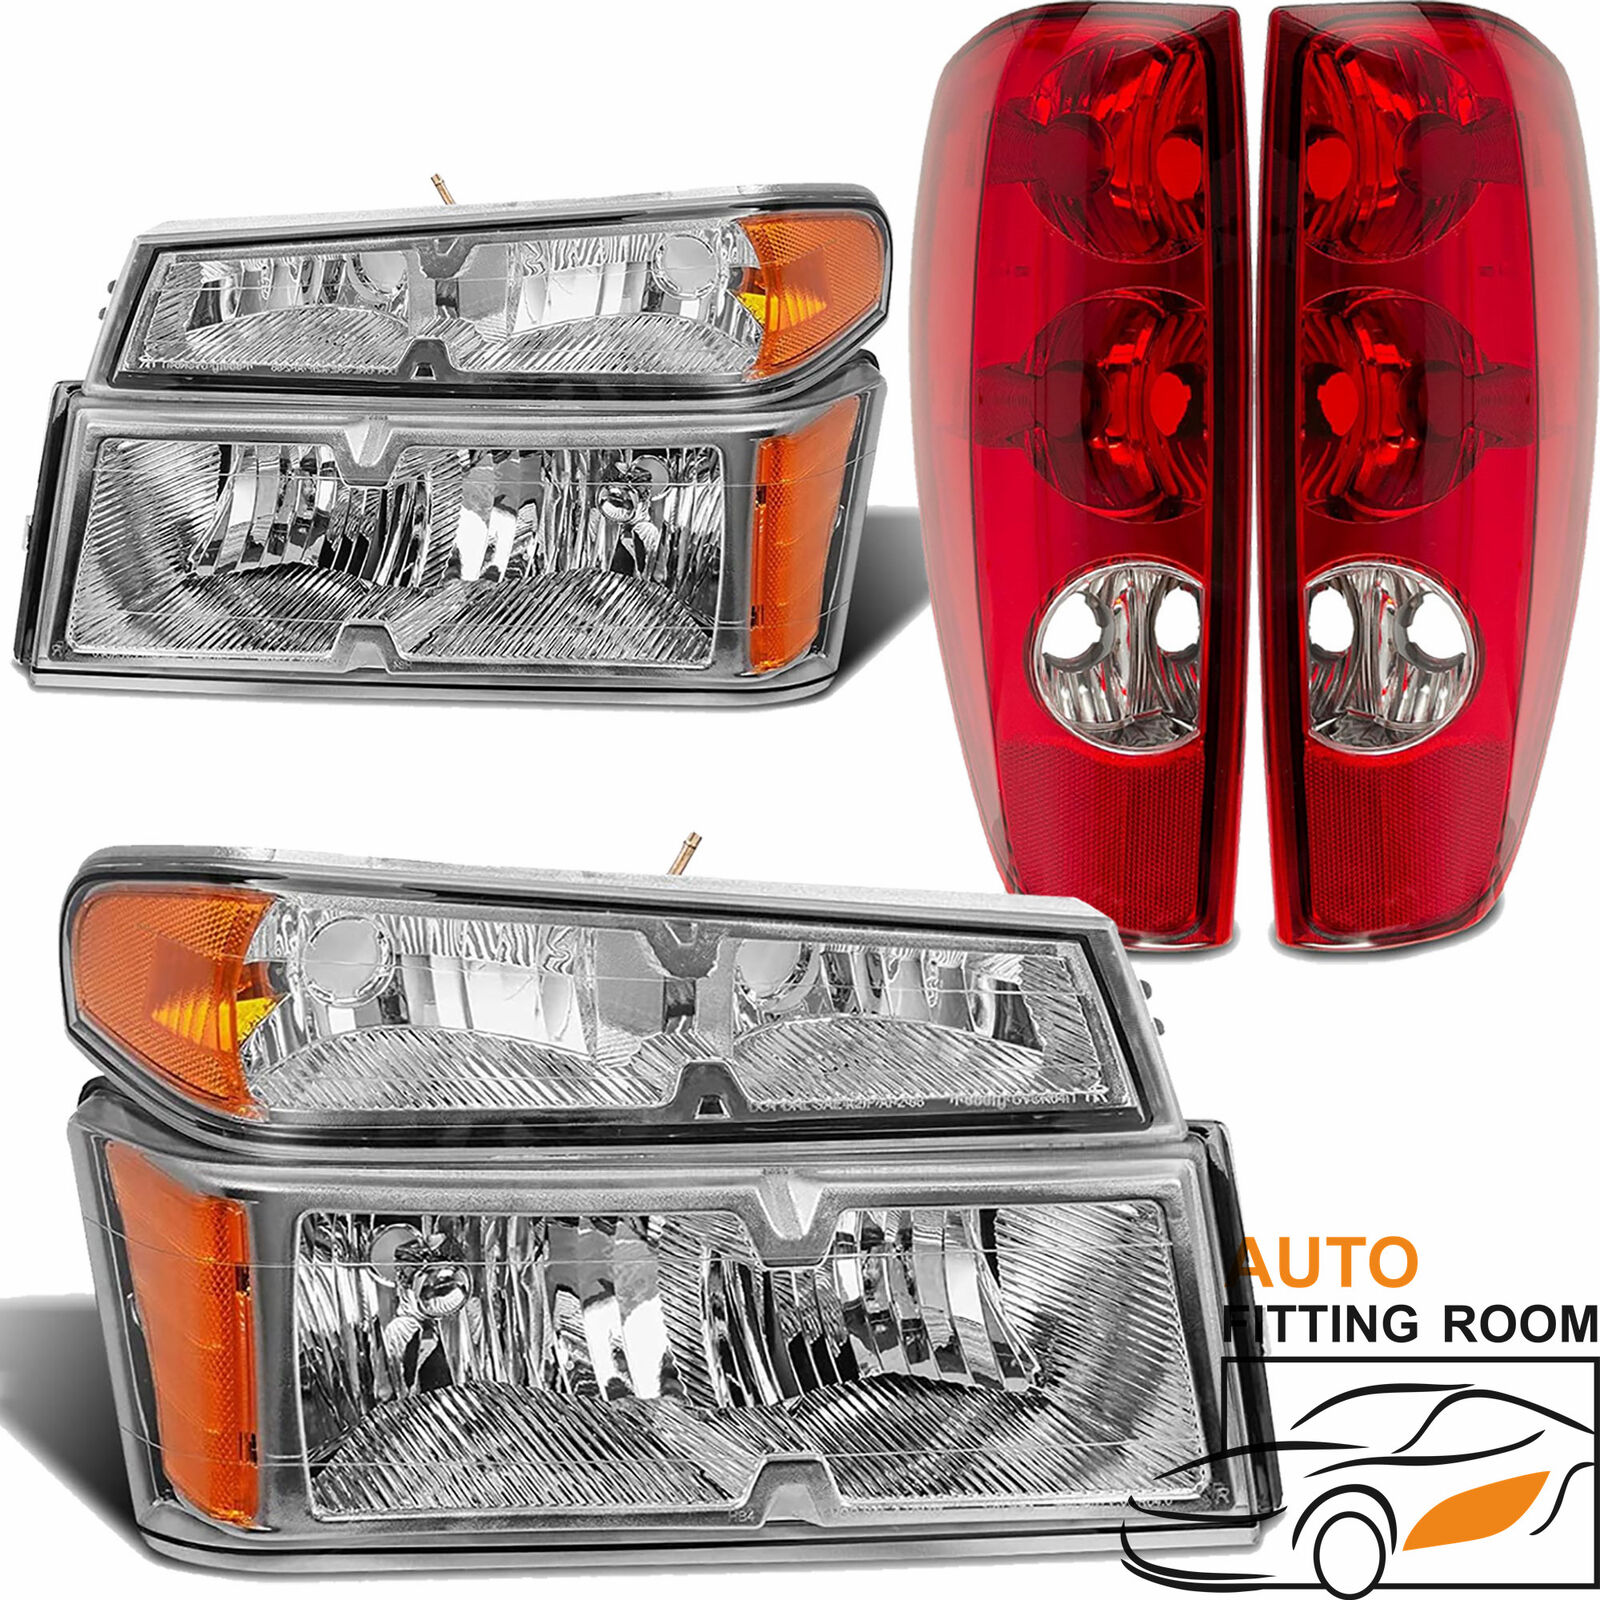 Fit For 2004-12 Chevy Colorado GMC Canyon Chrome Housing Headlights + Tail light